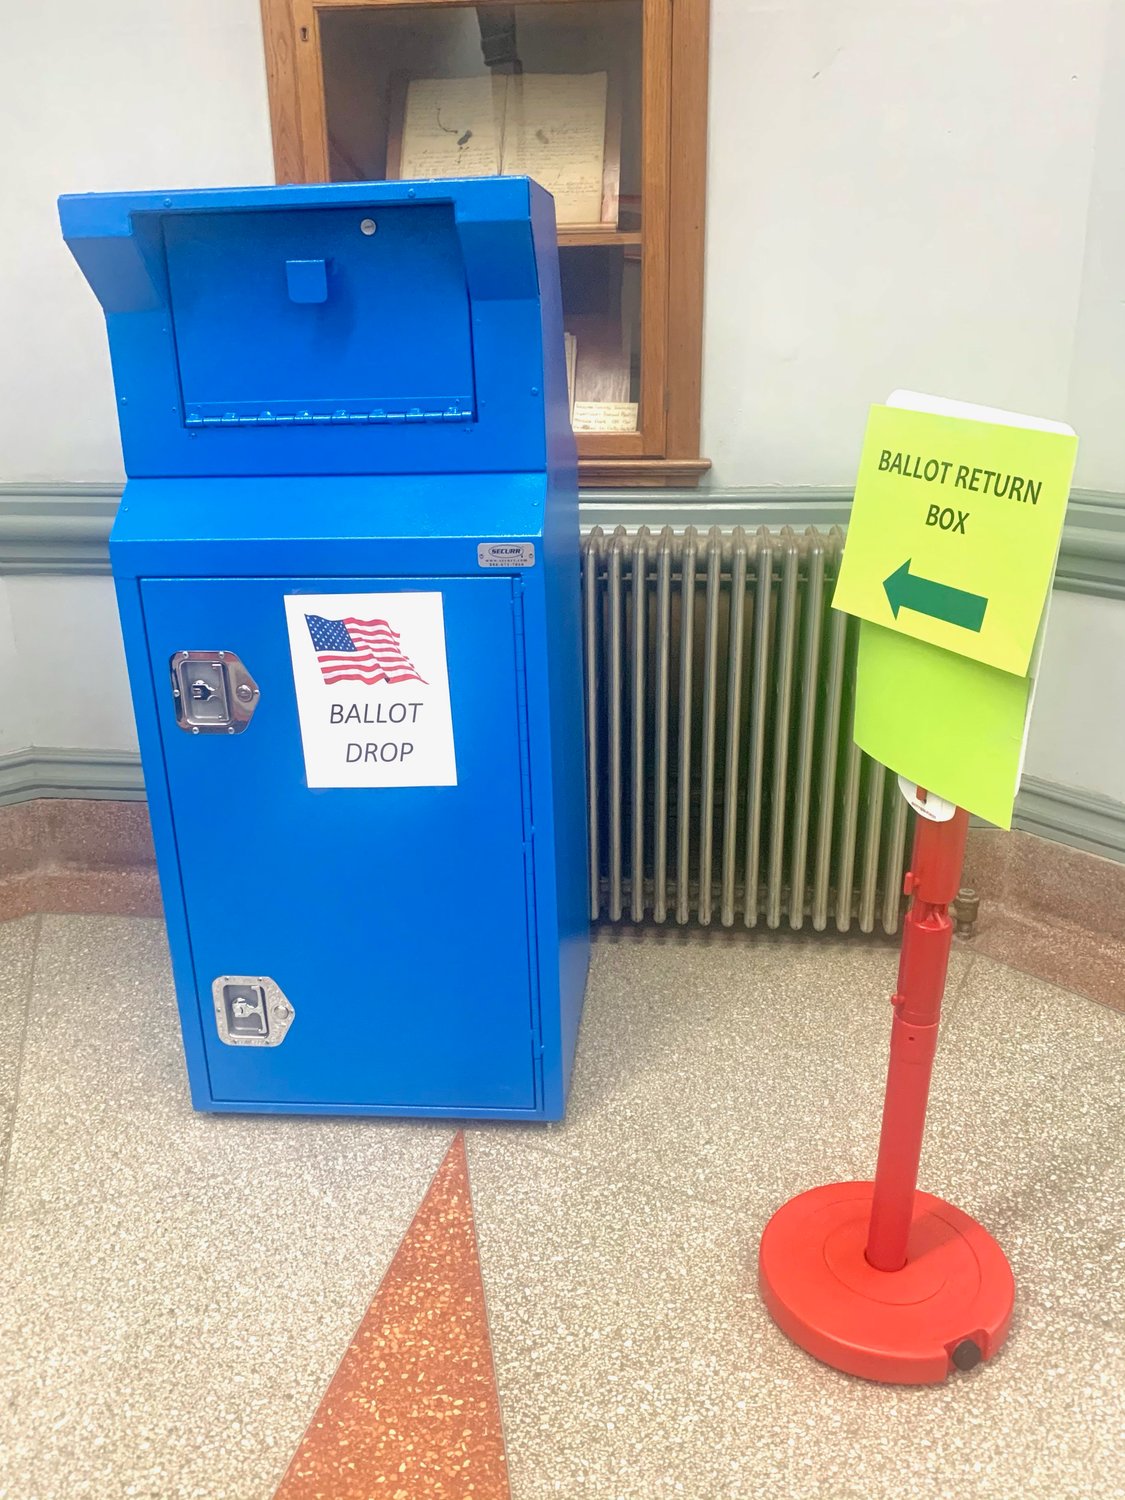 A mail-in ballot dropbox in the Wayne County Courthouse gives voters a chance to ensure their ballot reaches the elections bureau.